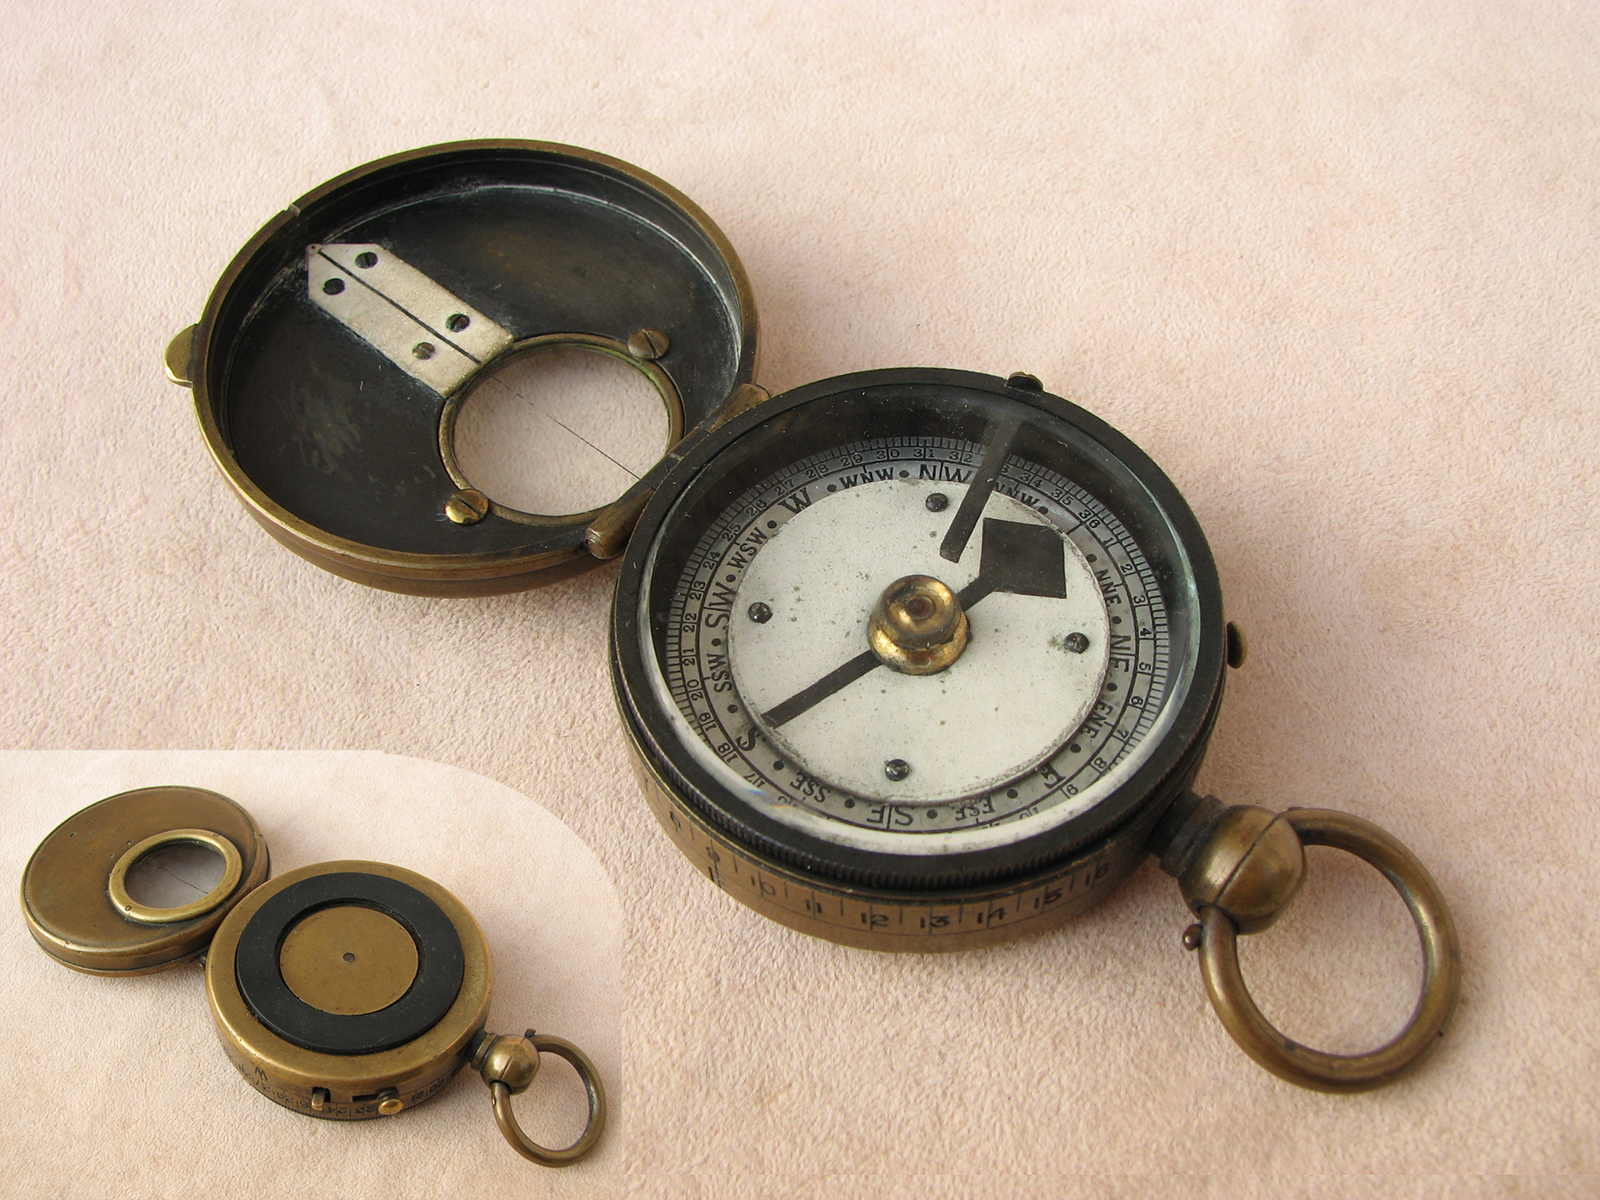 Lawrence & Mayo brass cased marching compass circa 1910